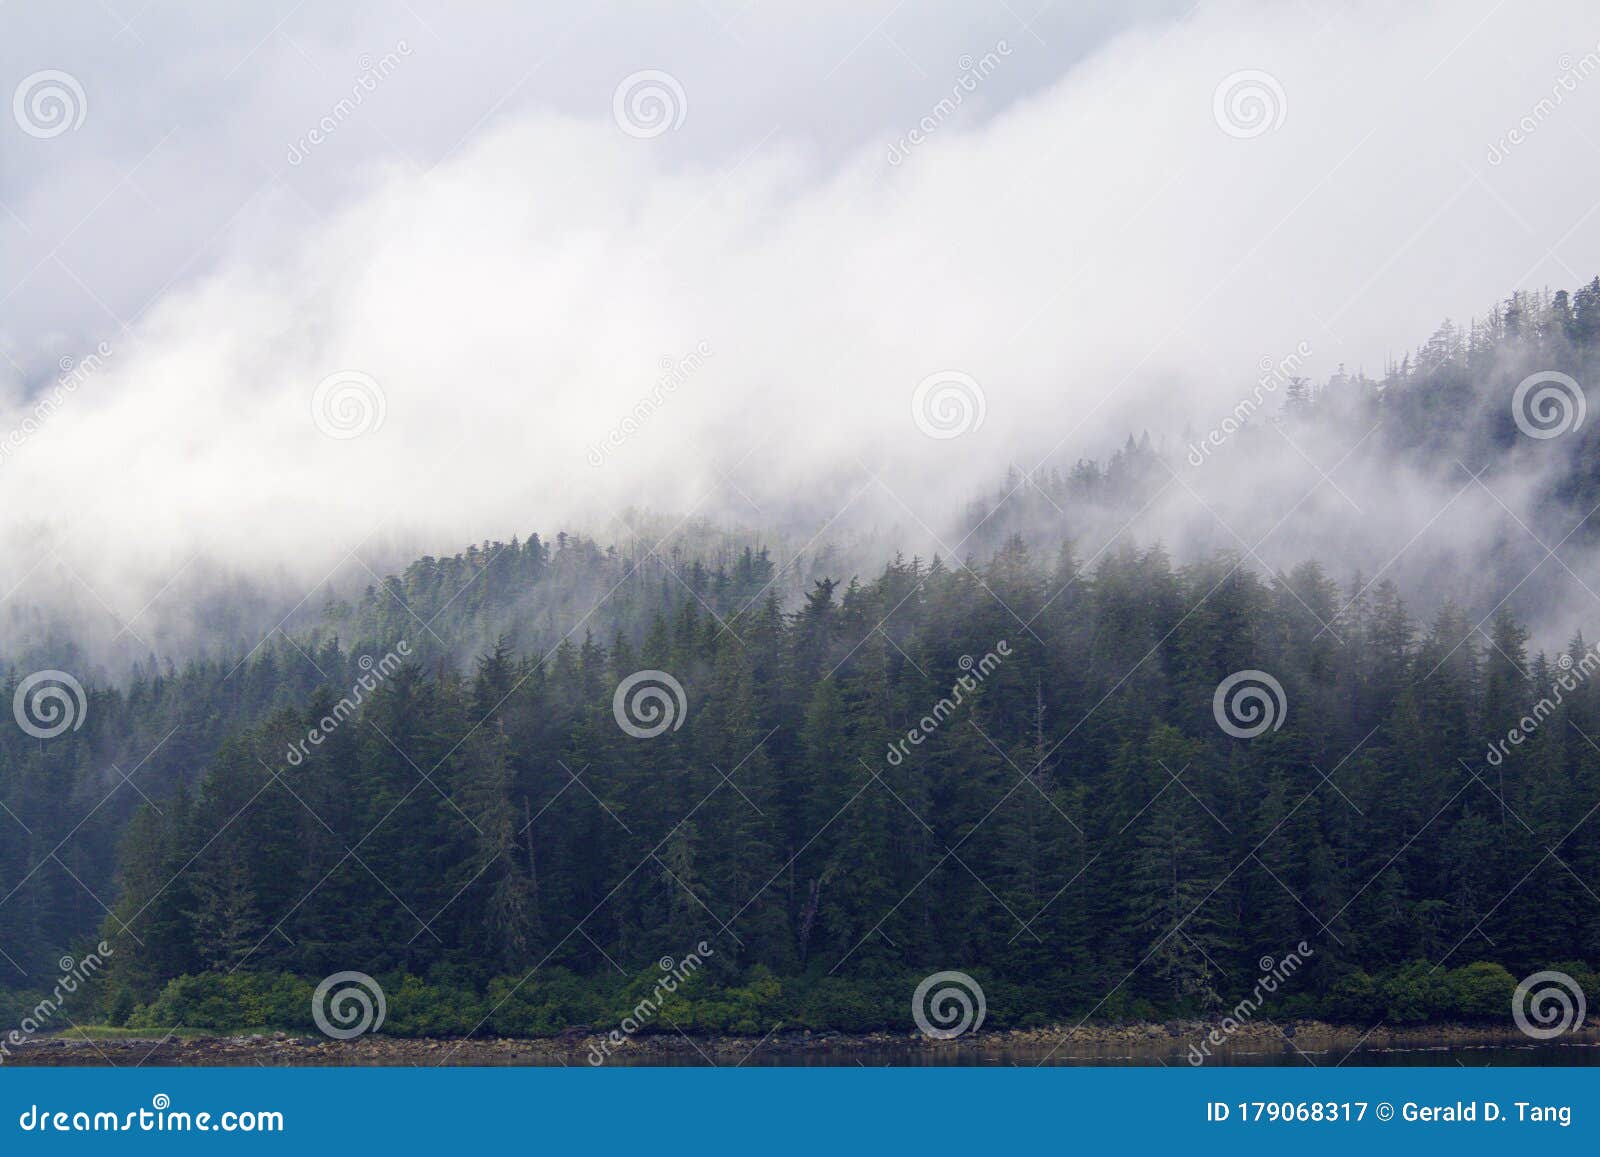 cloudy forest peril strait   846609